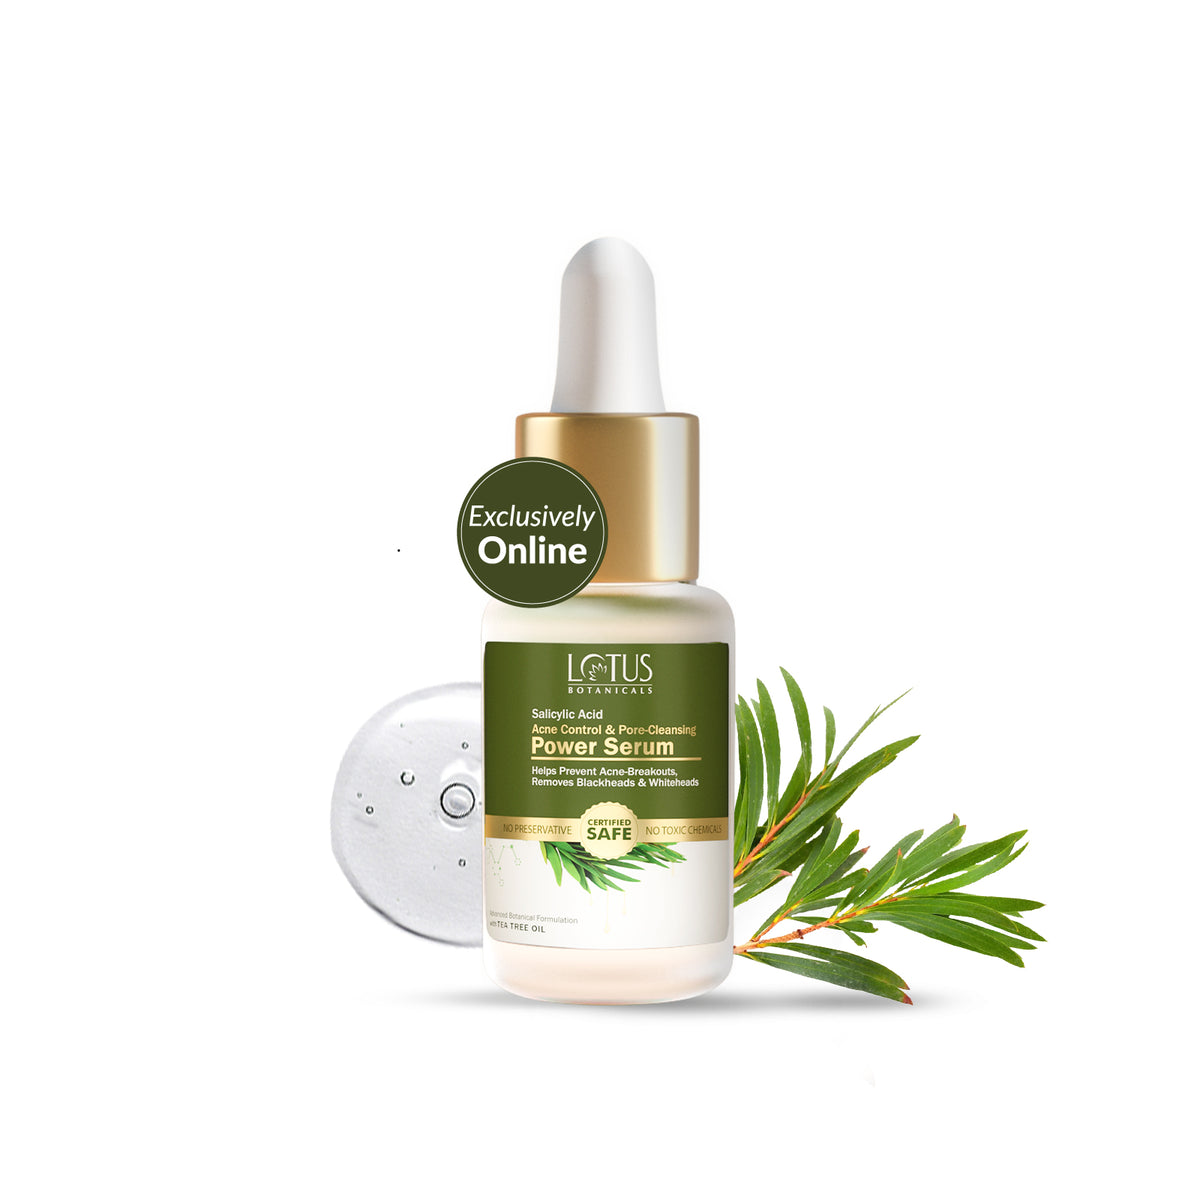 Salicylic Acid Tea Tree Acne Control and Pore Cleansing Power Serum - Clearing and Refreshing Skincare Solution